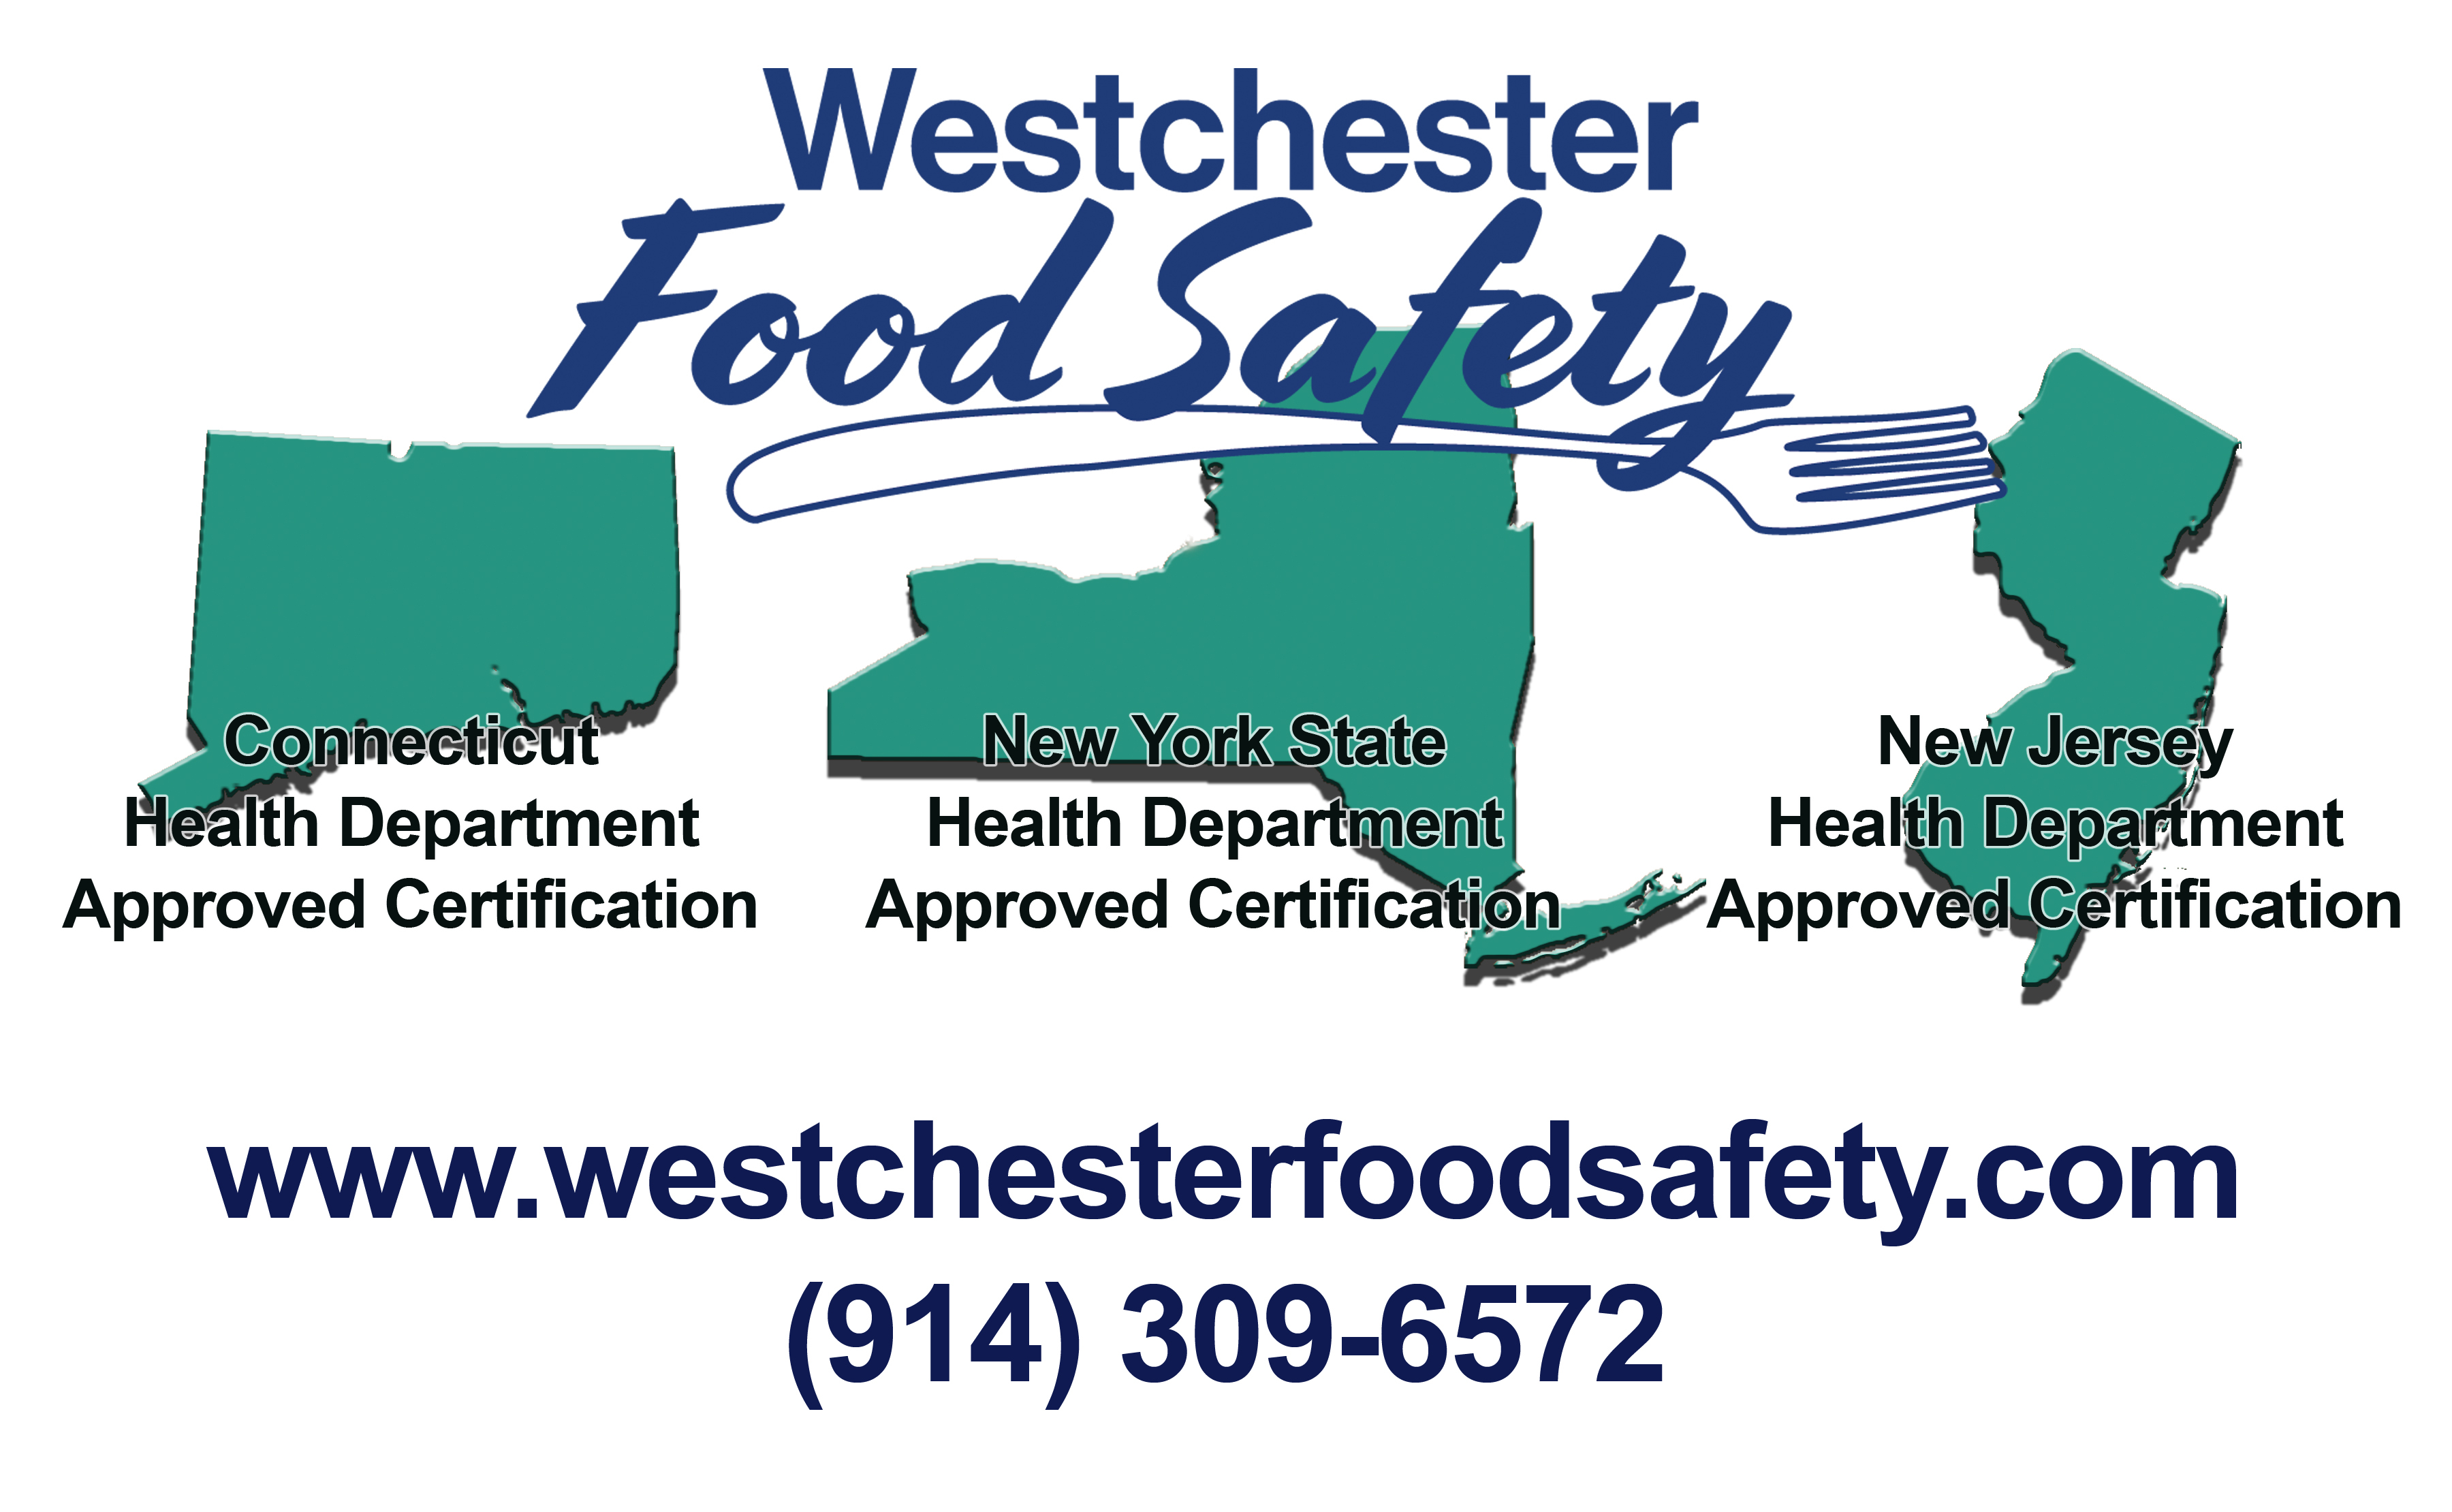 Westchester Food Safety Photo